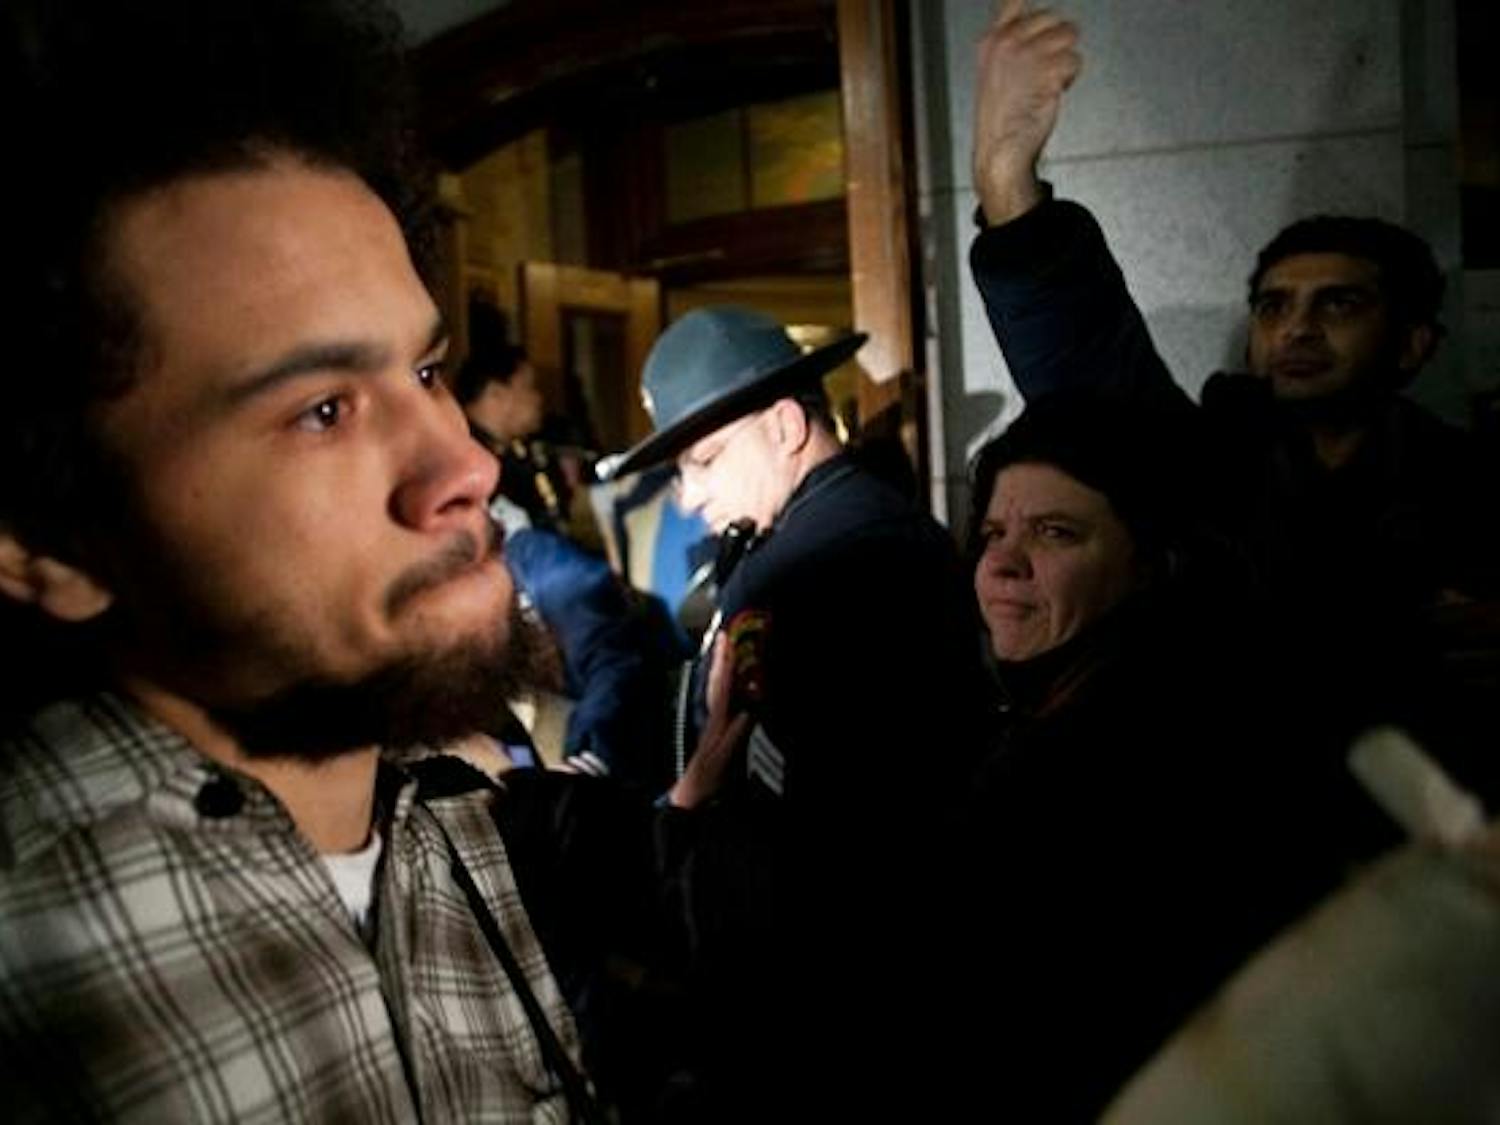 Two UW student protesters jailed